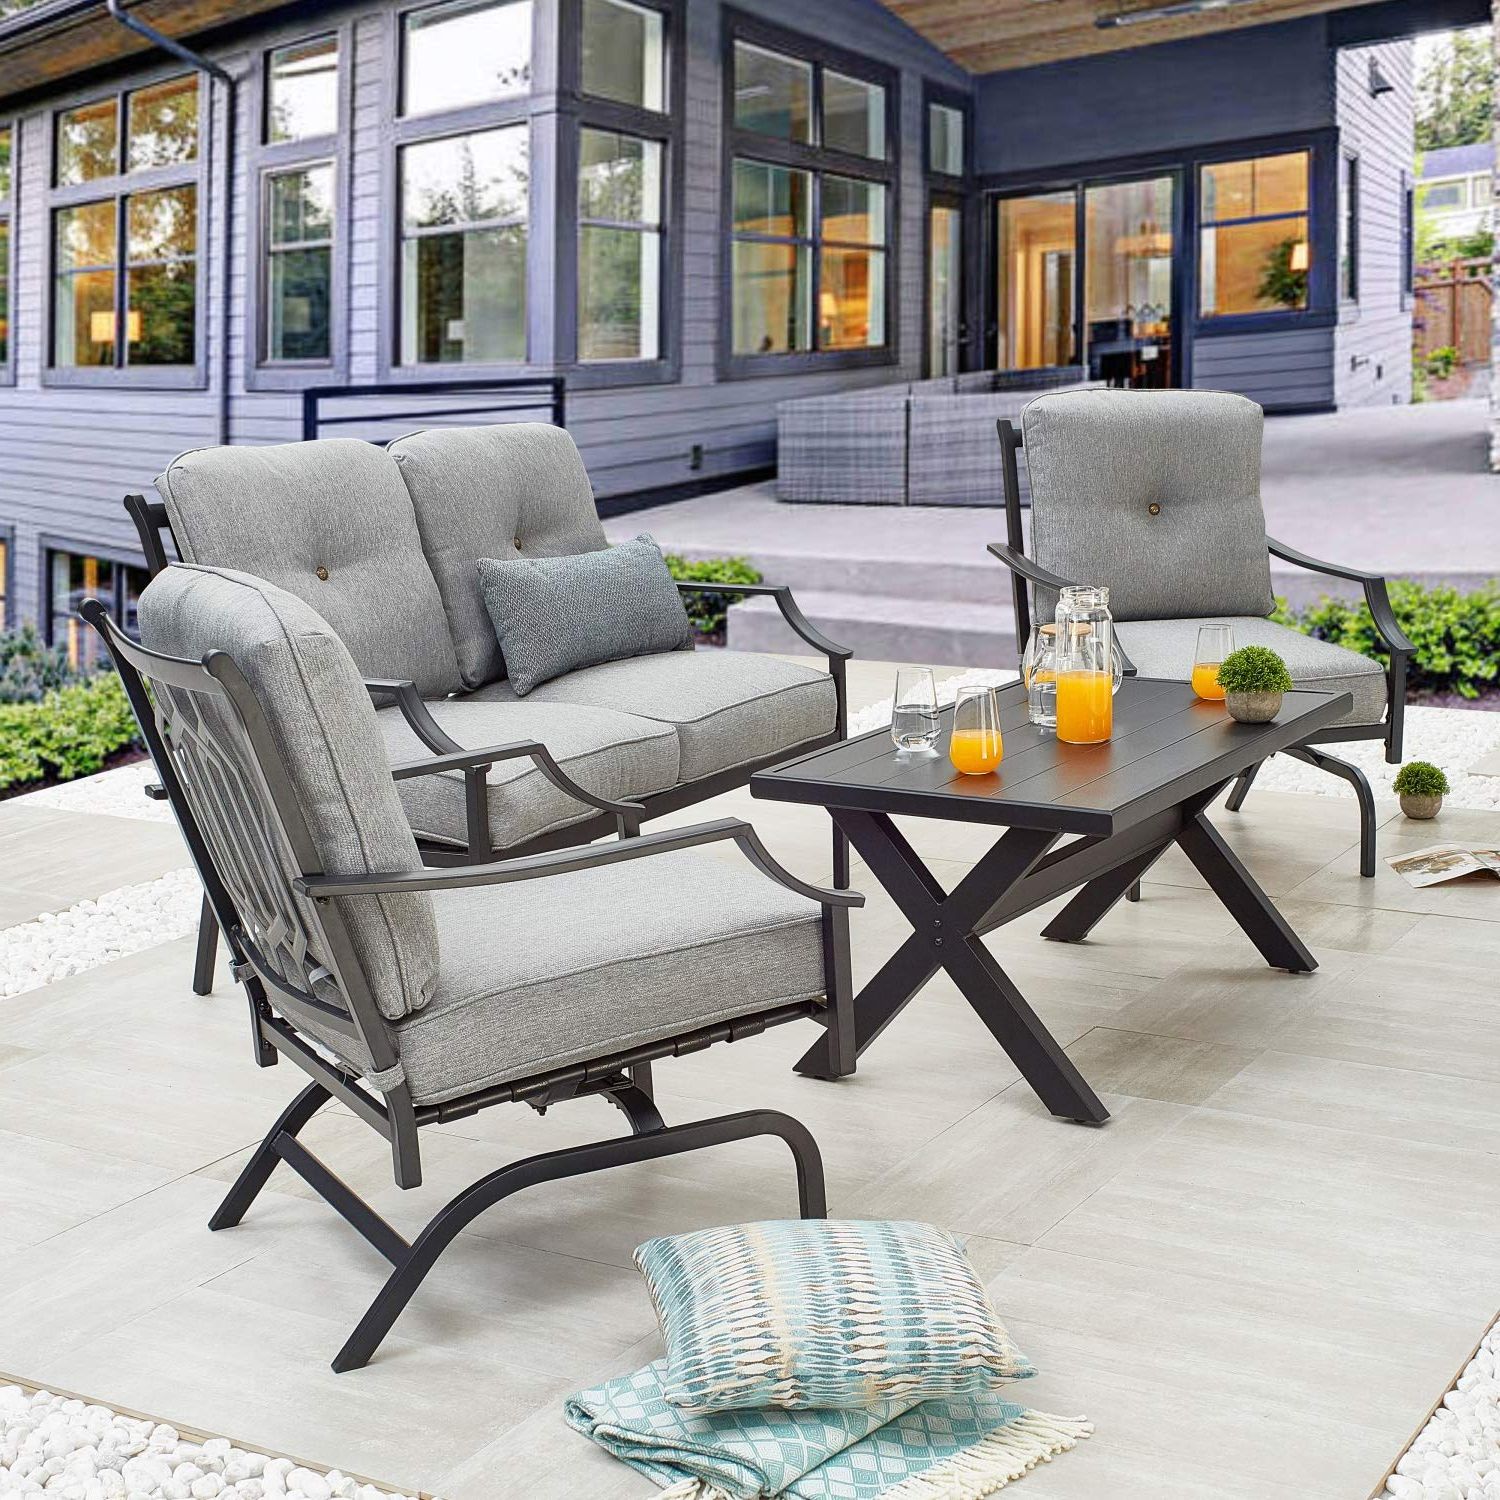 Amazon: Patiofestival Patio Conversation Set Metal Outdoor Furniture  Sets All Weather Cushioned Loveseat & 2 Rocking Chairs & 1 Coffee Table For  Poolside Lawn Yard 4pcs : Patio, Lawn & Garden With Regard To Most Recent Furniture Conversation Set Cushioned Sofa Tables (View 8 of 15)